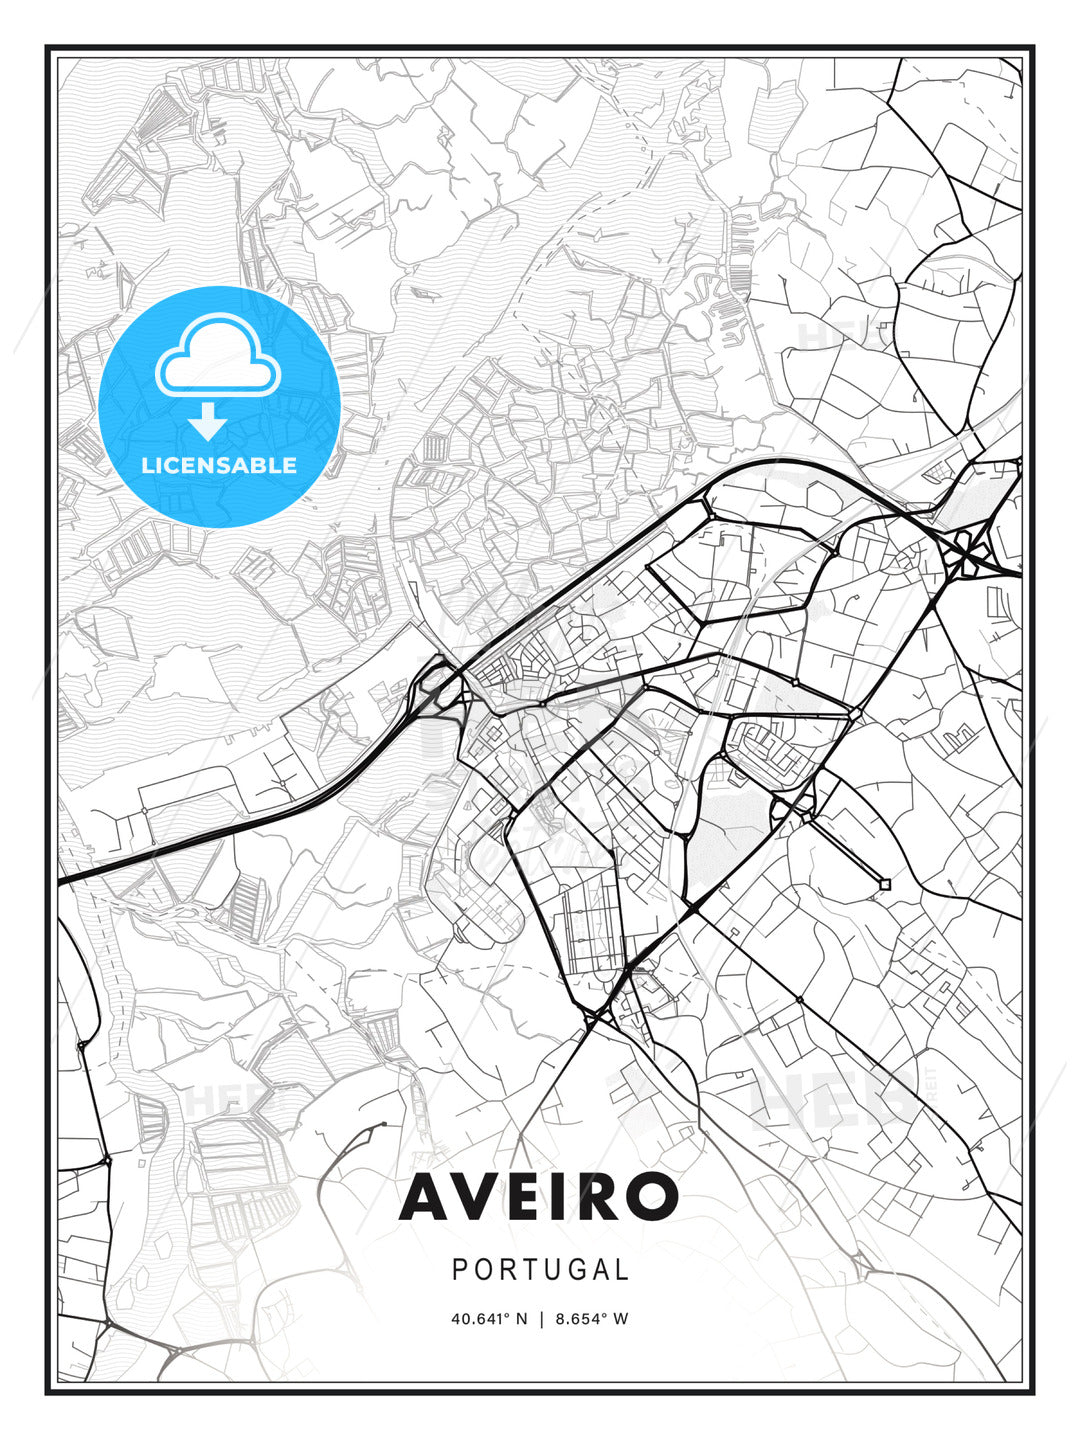 Aveiro, Portugal, Modern Print Template in Various Formats - HEBSTREITS Sketches